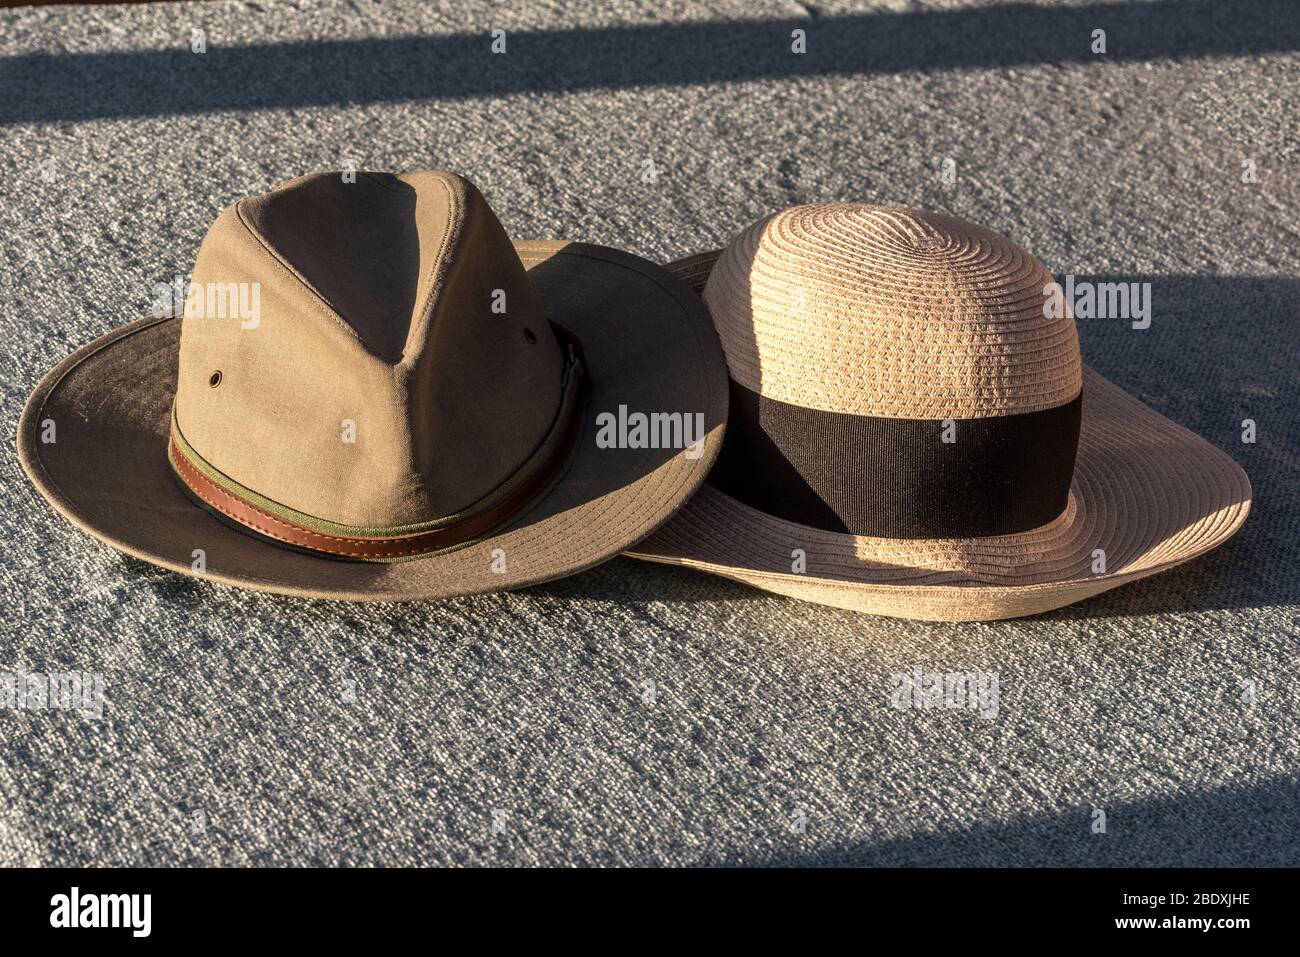 Togetherness. Couple of sun hats. Stock Photo